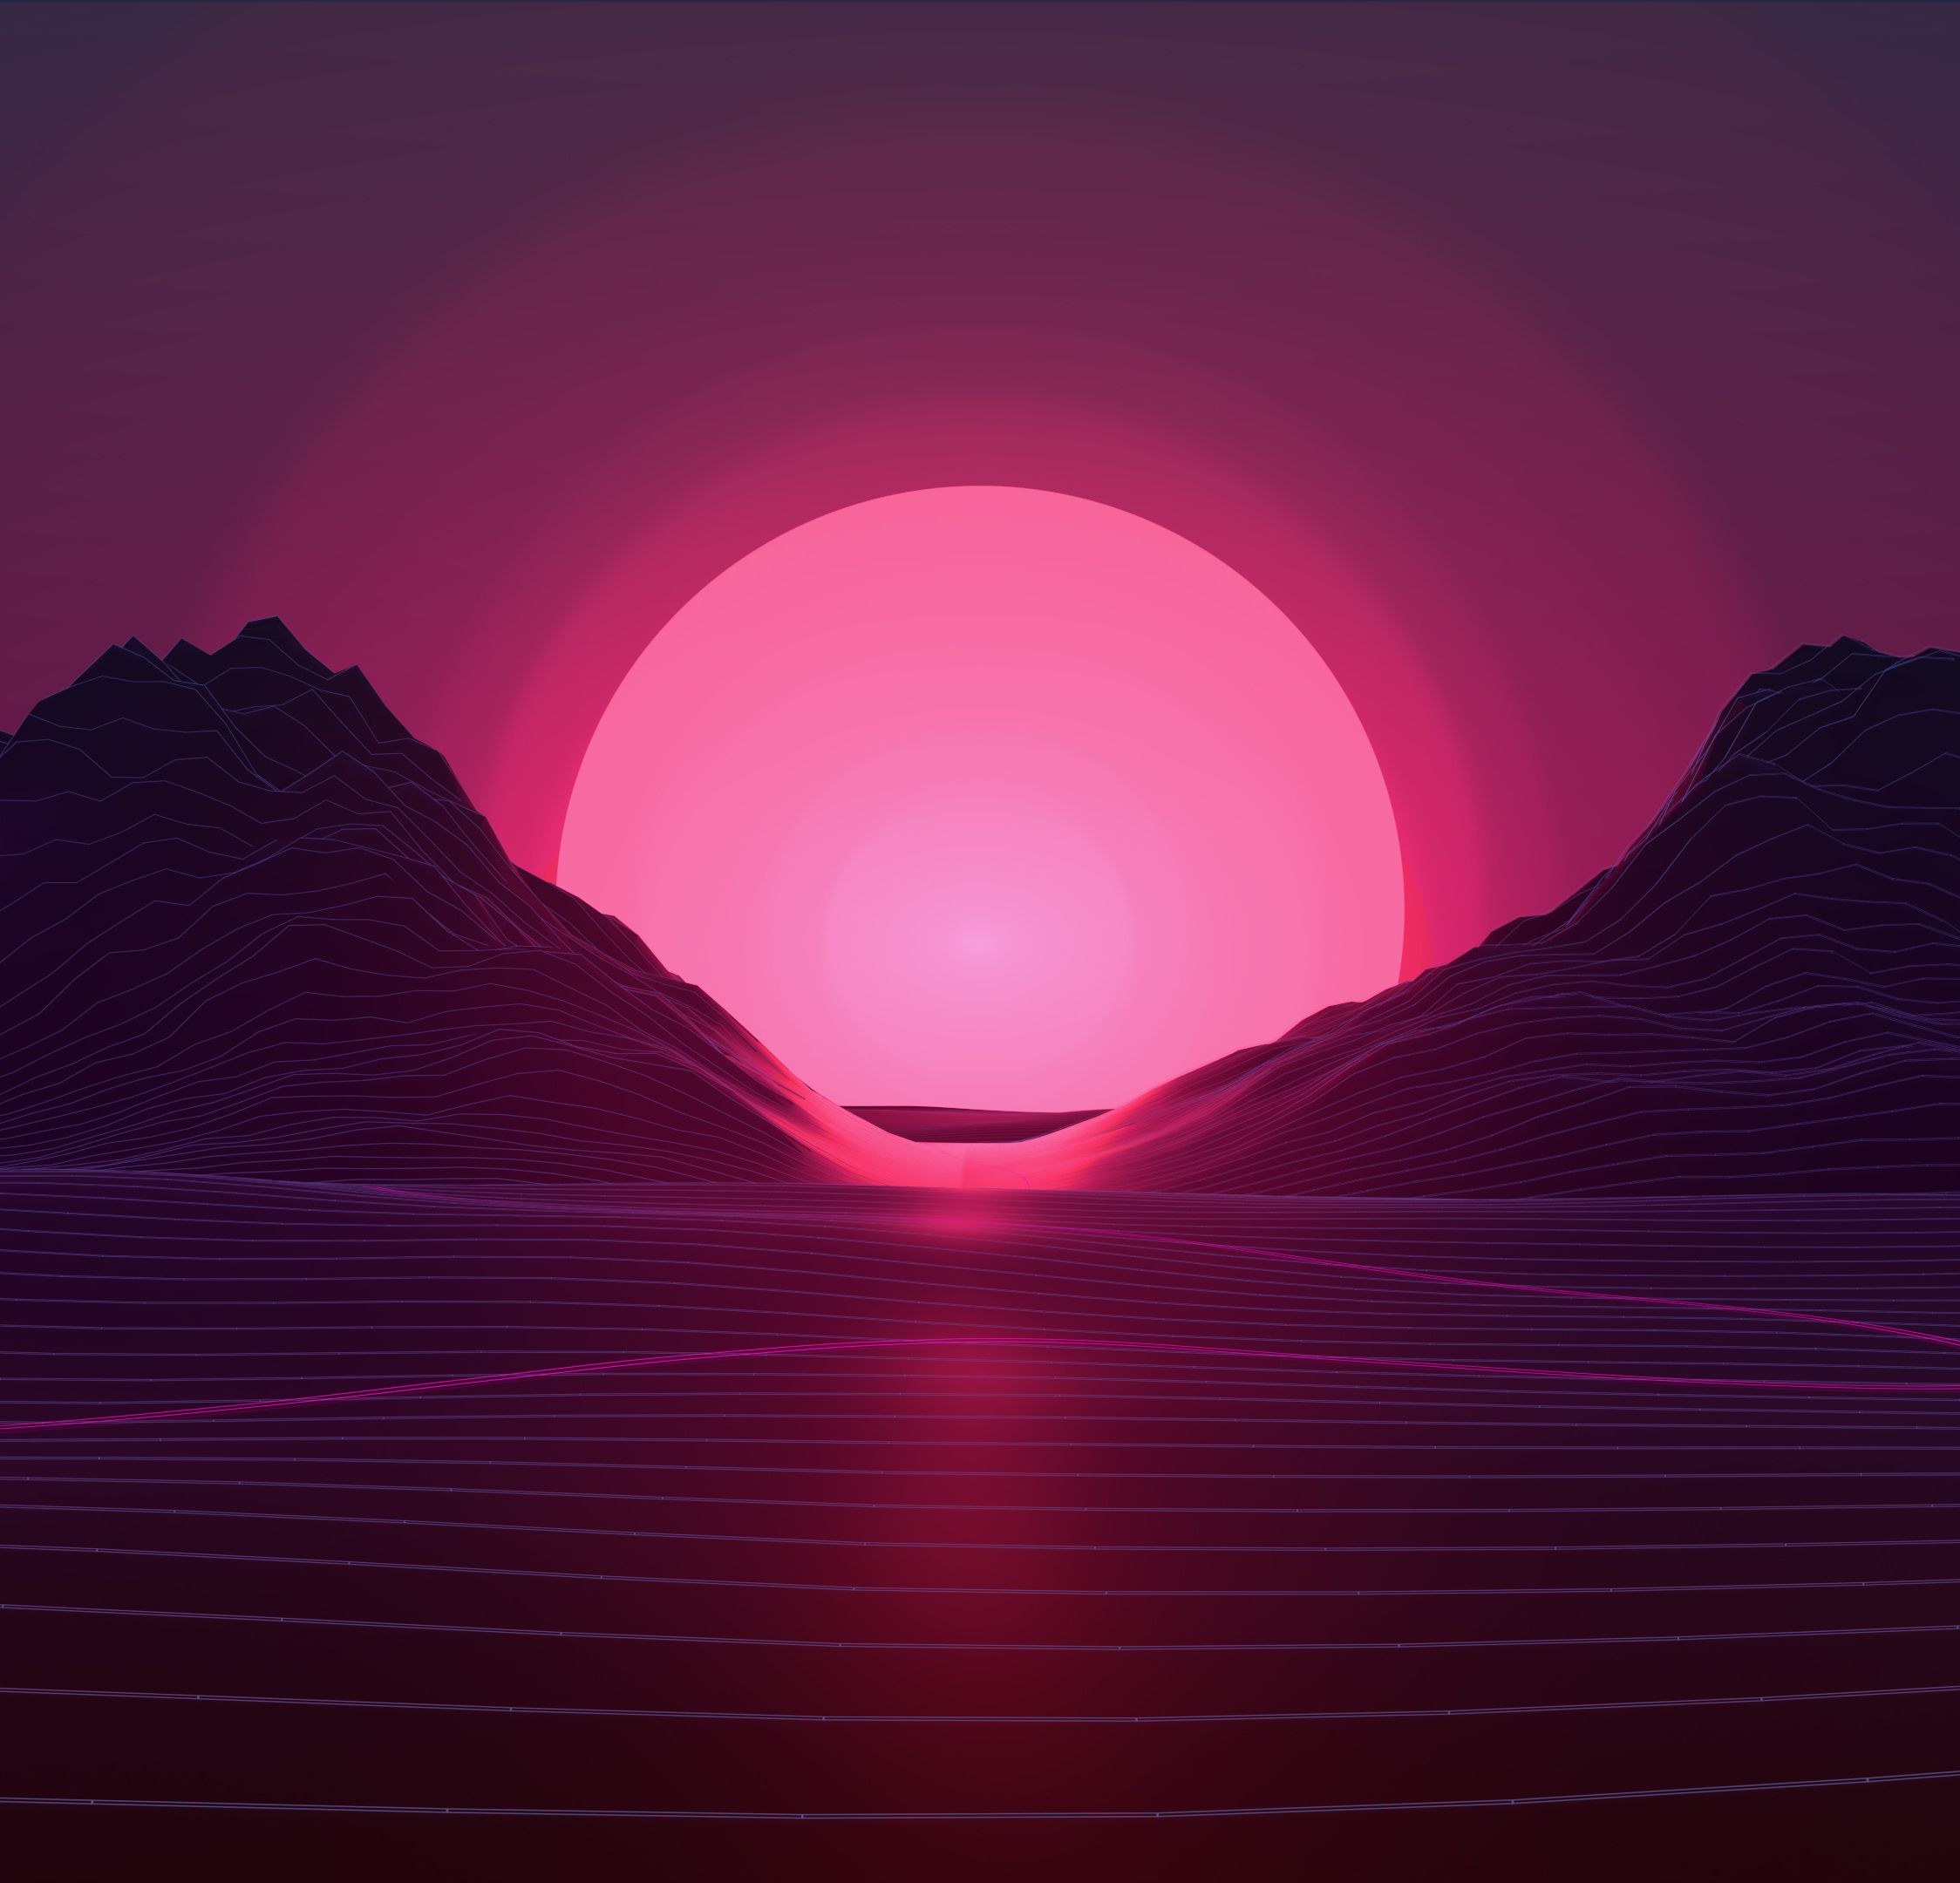 A sunset scene with mountains and water - Neon pink